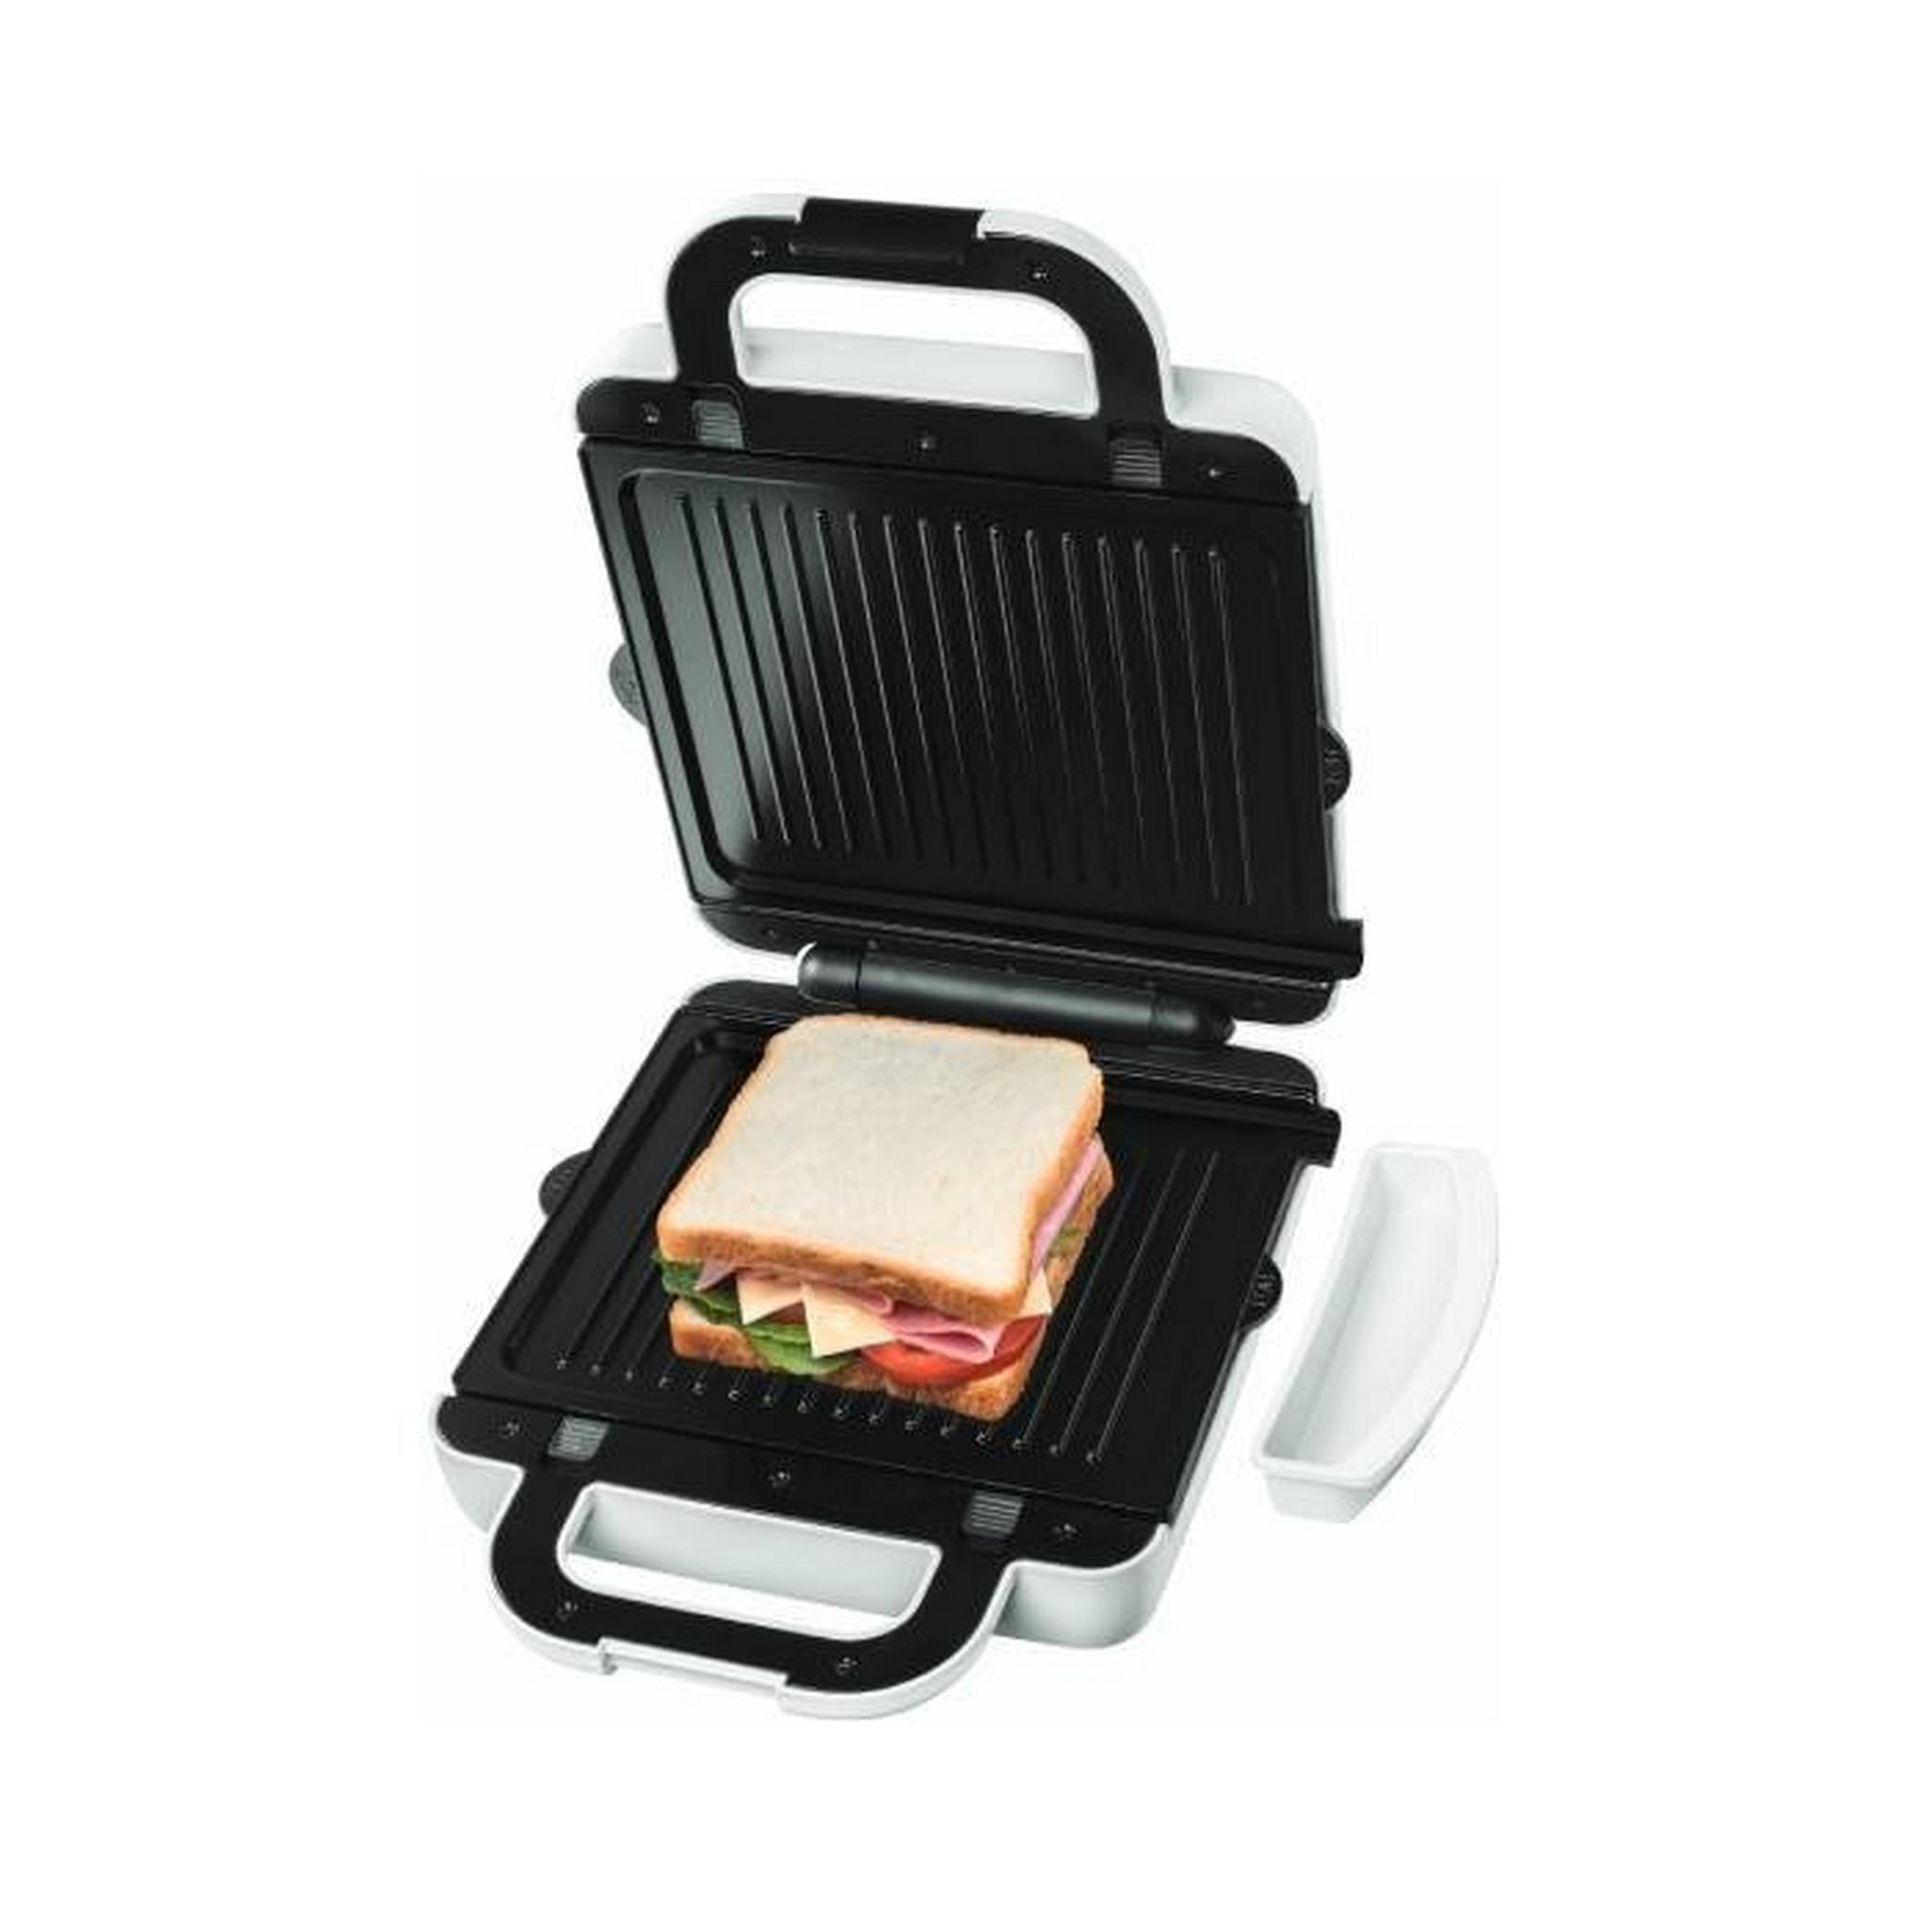 Kenwood Sandwich Maker 3 in 1, 1300Watts, SMP94.A0WH - White